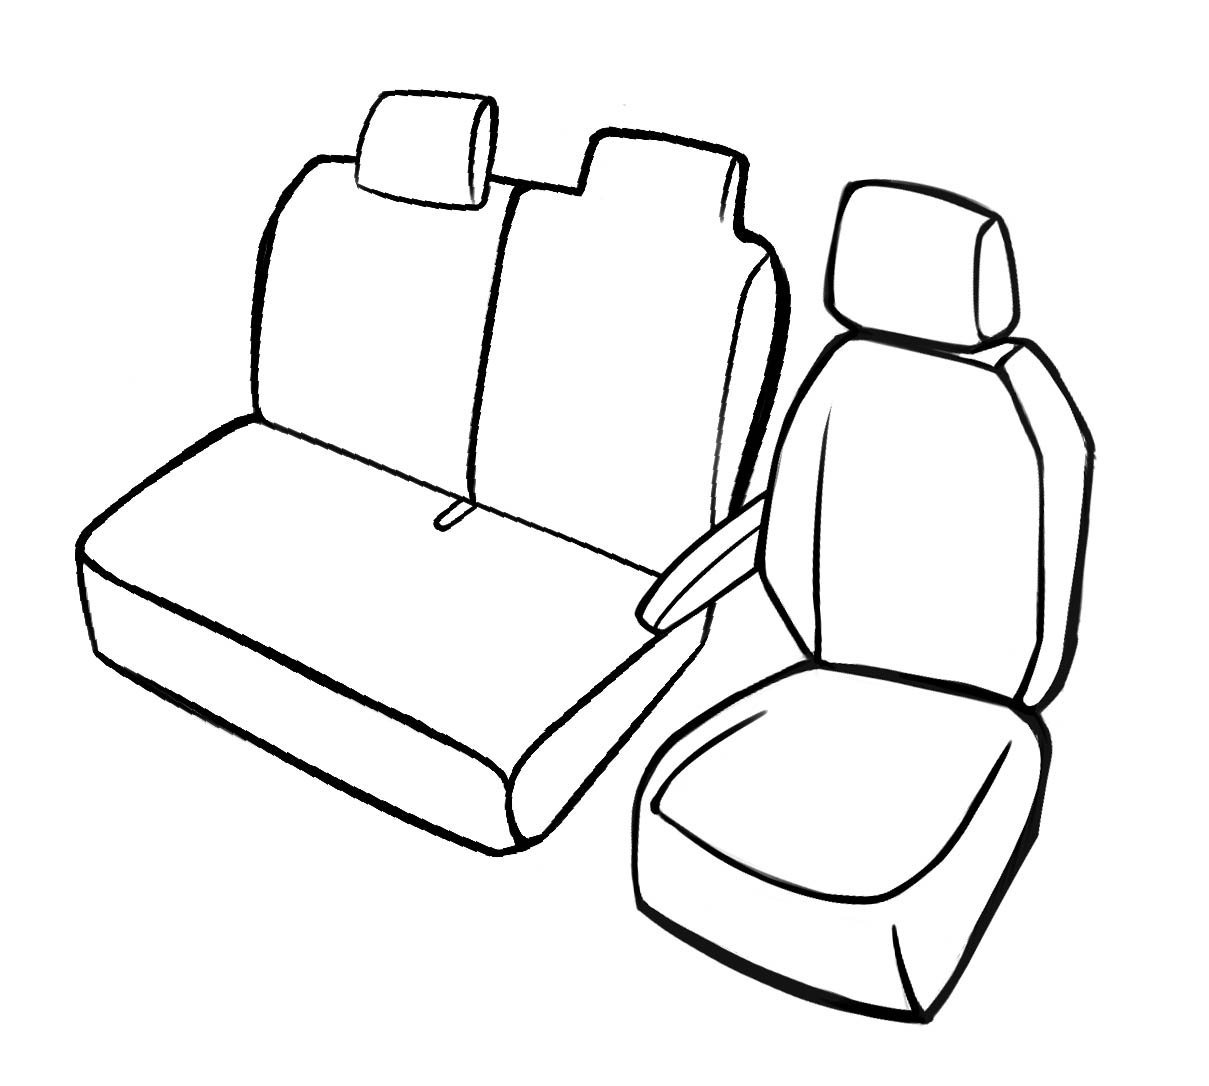 Premium Seat Cover for Renault Master II 1998-Today, 1 single seat cover front + armrest cover, 1 double bench cover